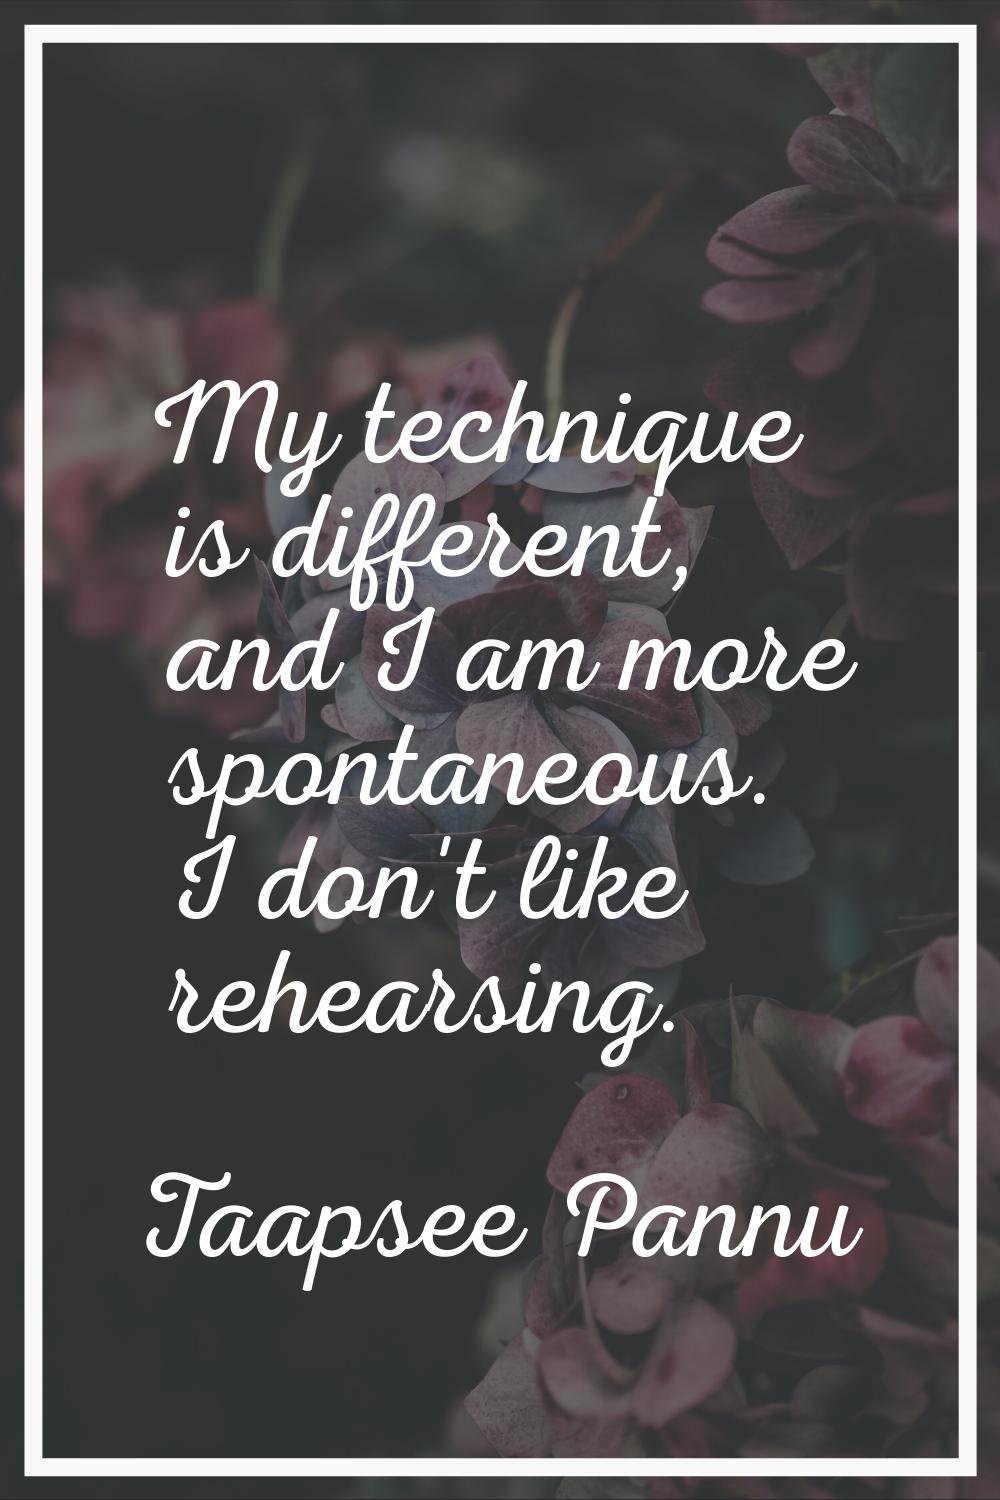 My technique is different, and I am more spontaneous. I don't like rehearsing.